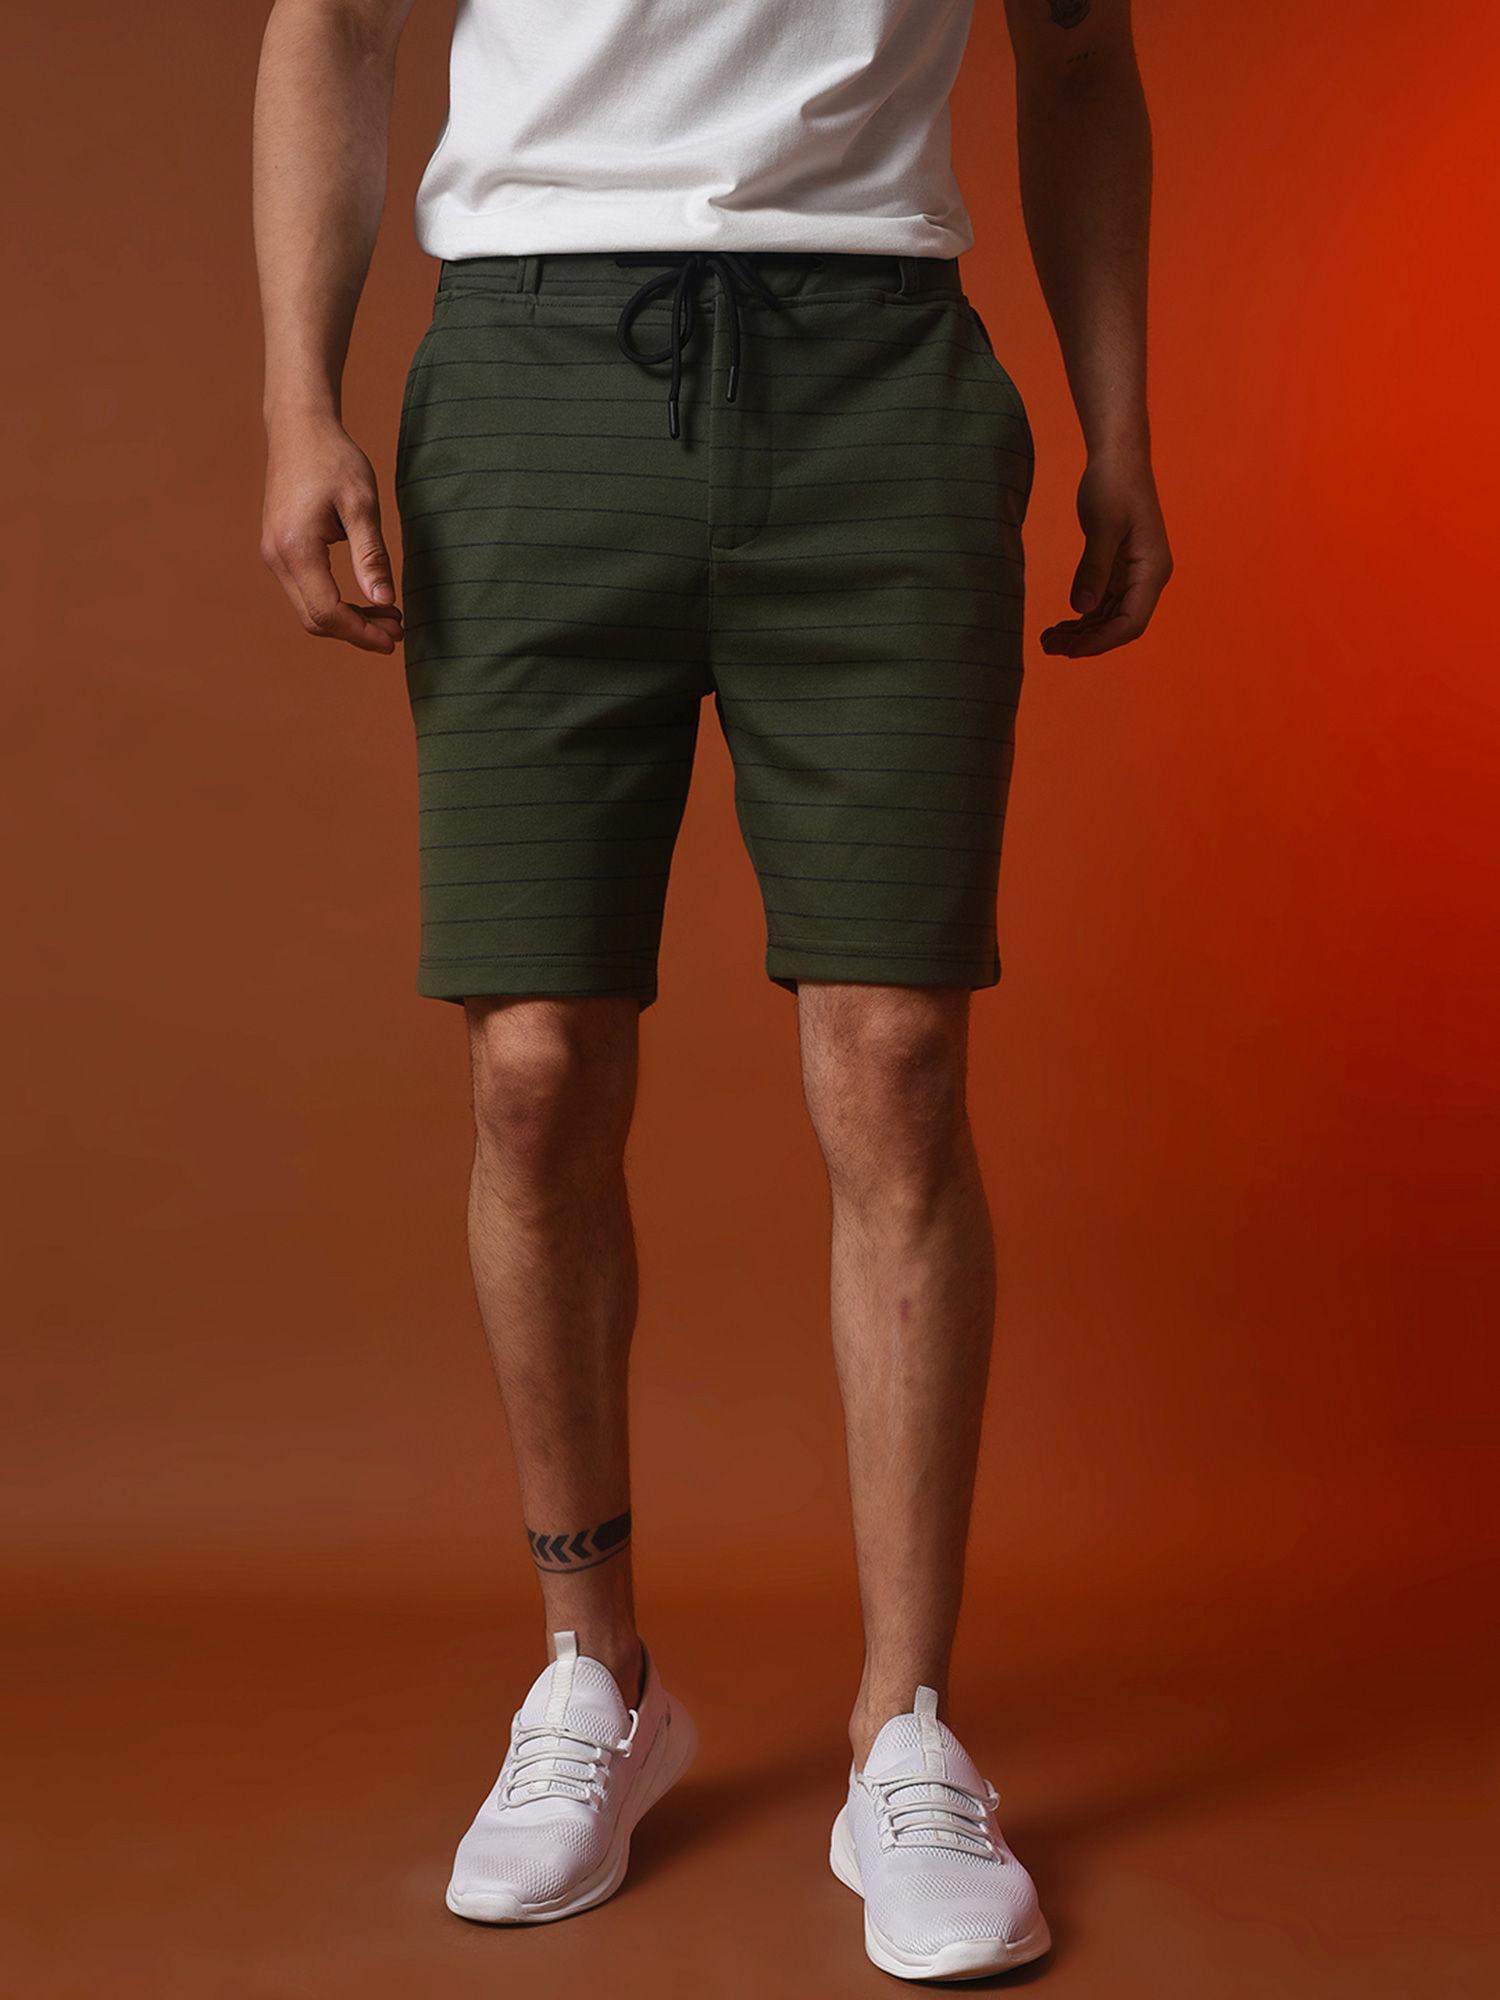 men-striped-stylish-casual-and-active-shorts